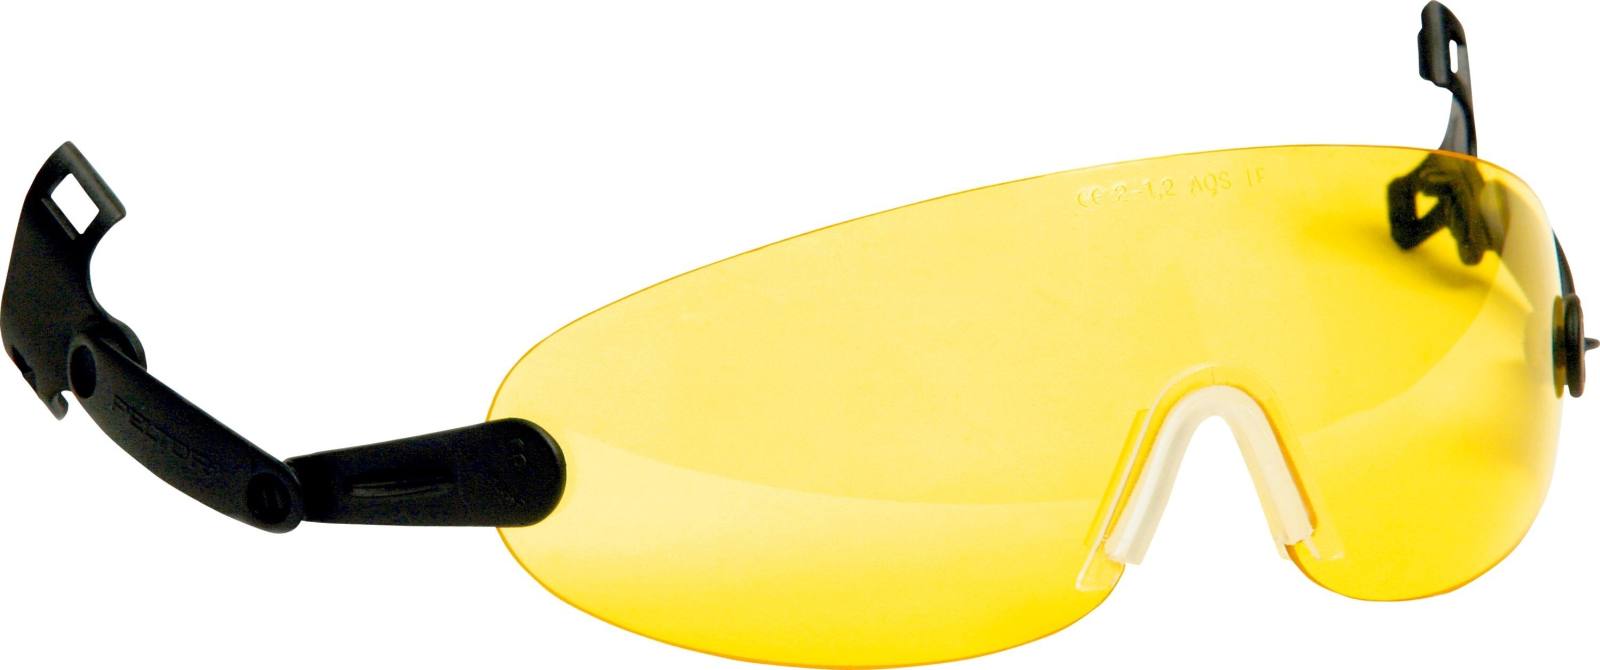 3M Integratable safety goggles for safety helmet, yellow, V9A